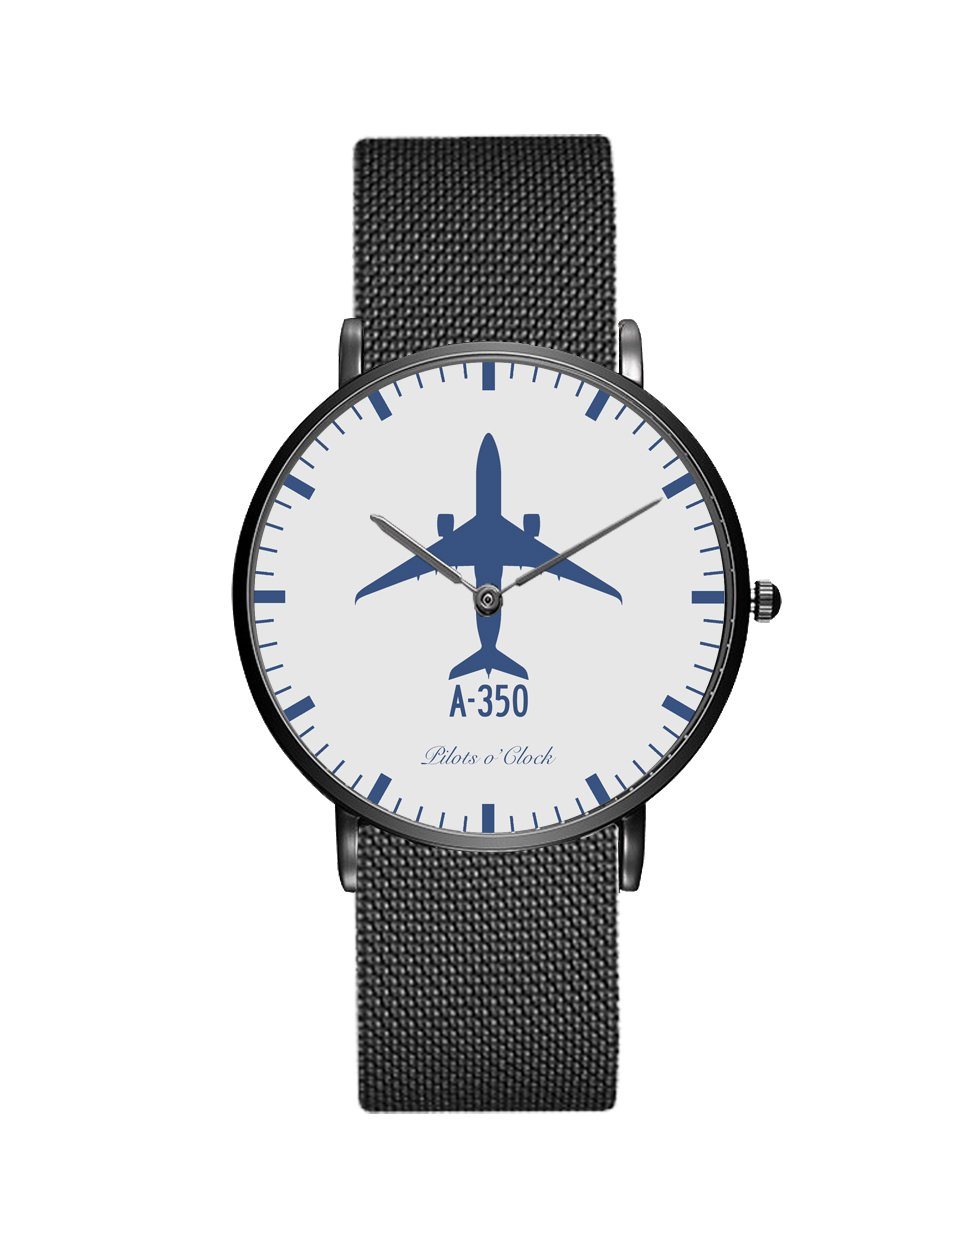 Airbus A350 Stainless Steel Strap Watches Pilot Eyes Store Black & Stainless Steel Strap 